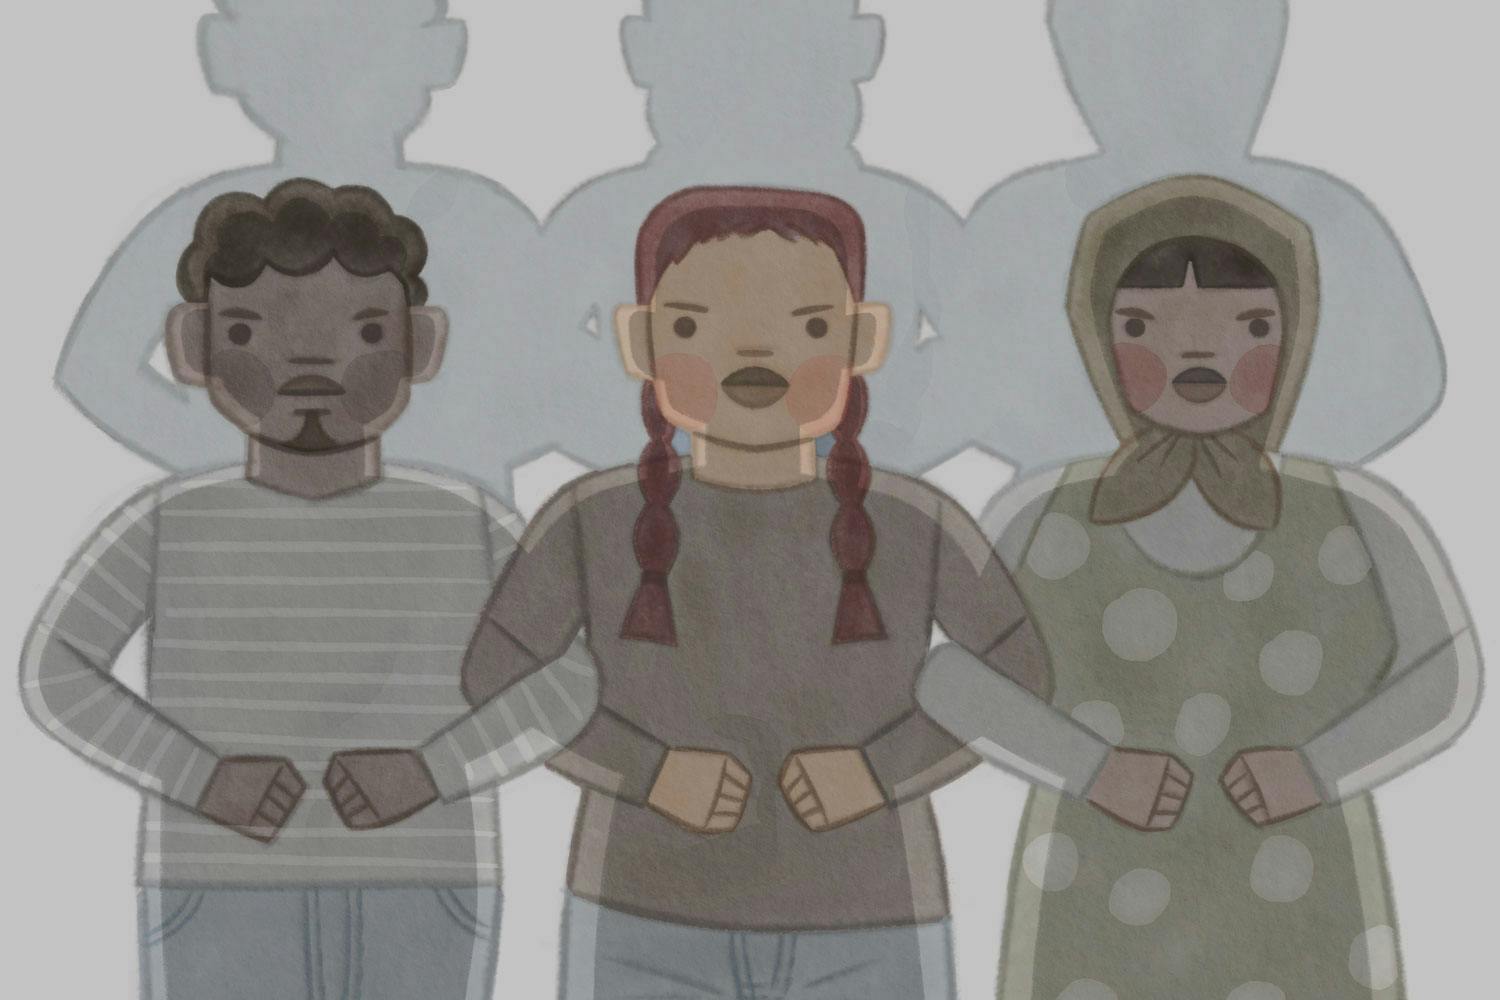 Illustration—three people linking arms, with stern facial expressions.